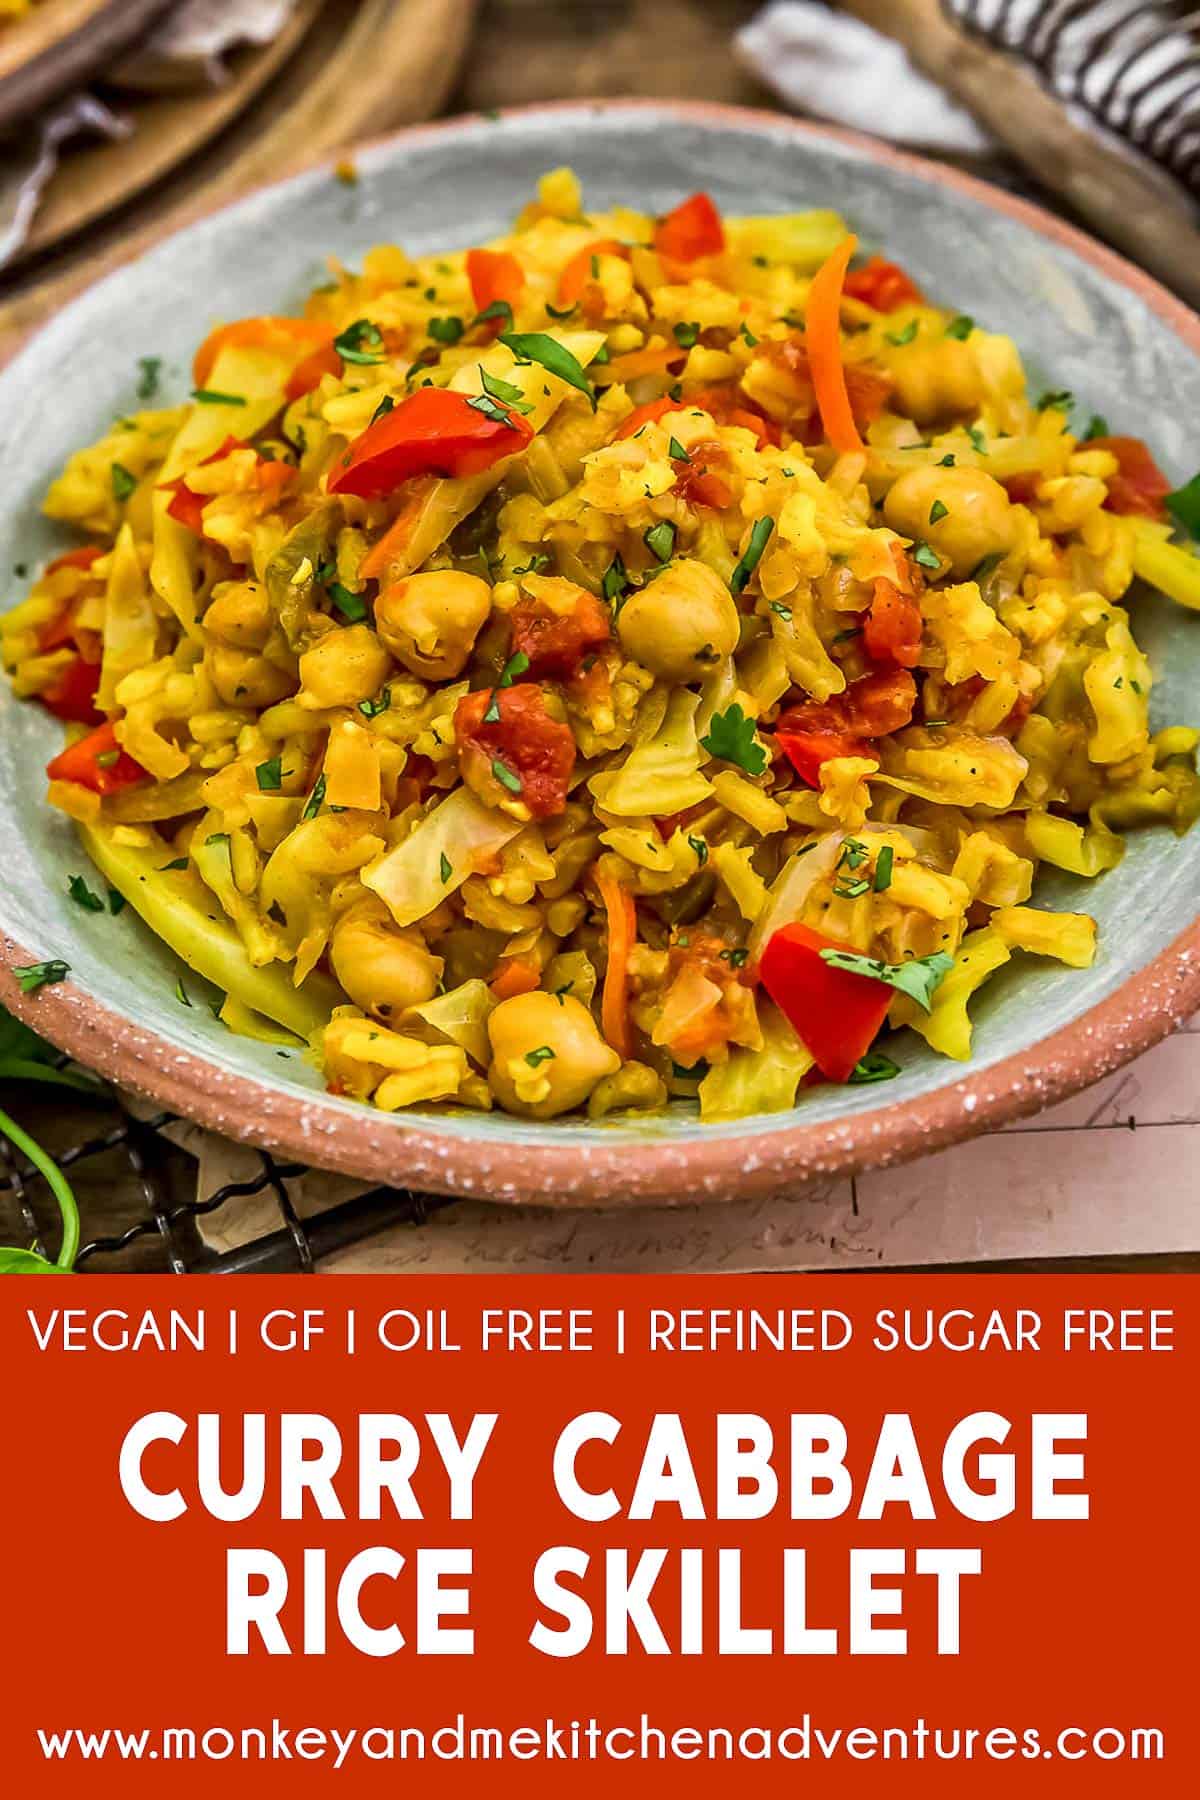 Curry Cabbage Rice Skillet with text description